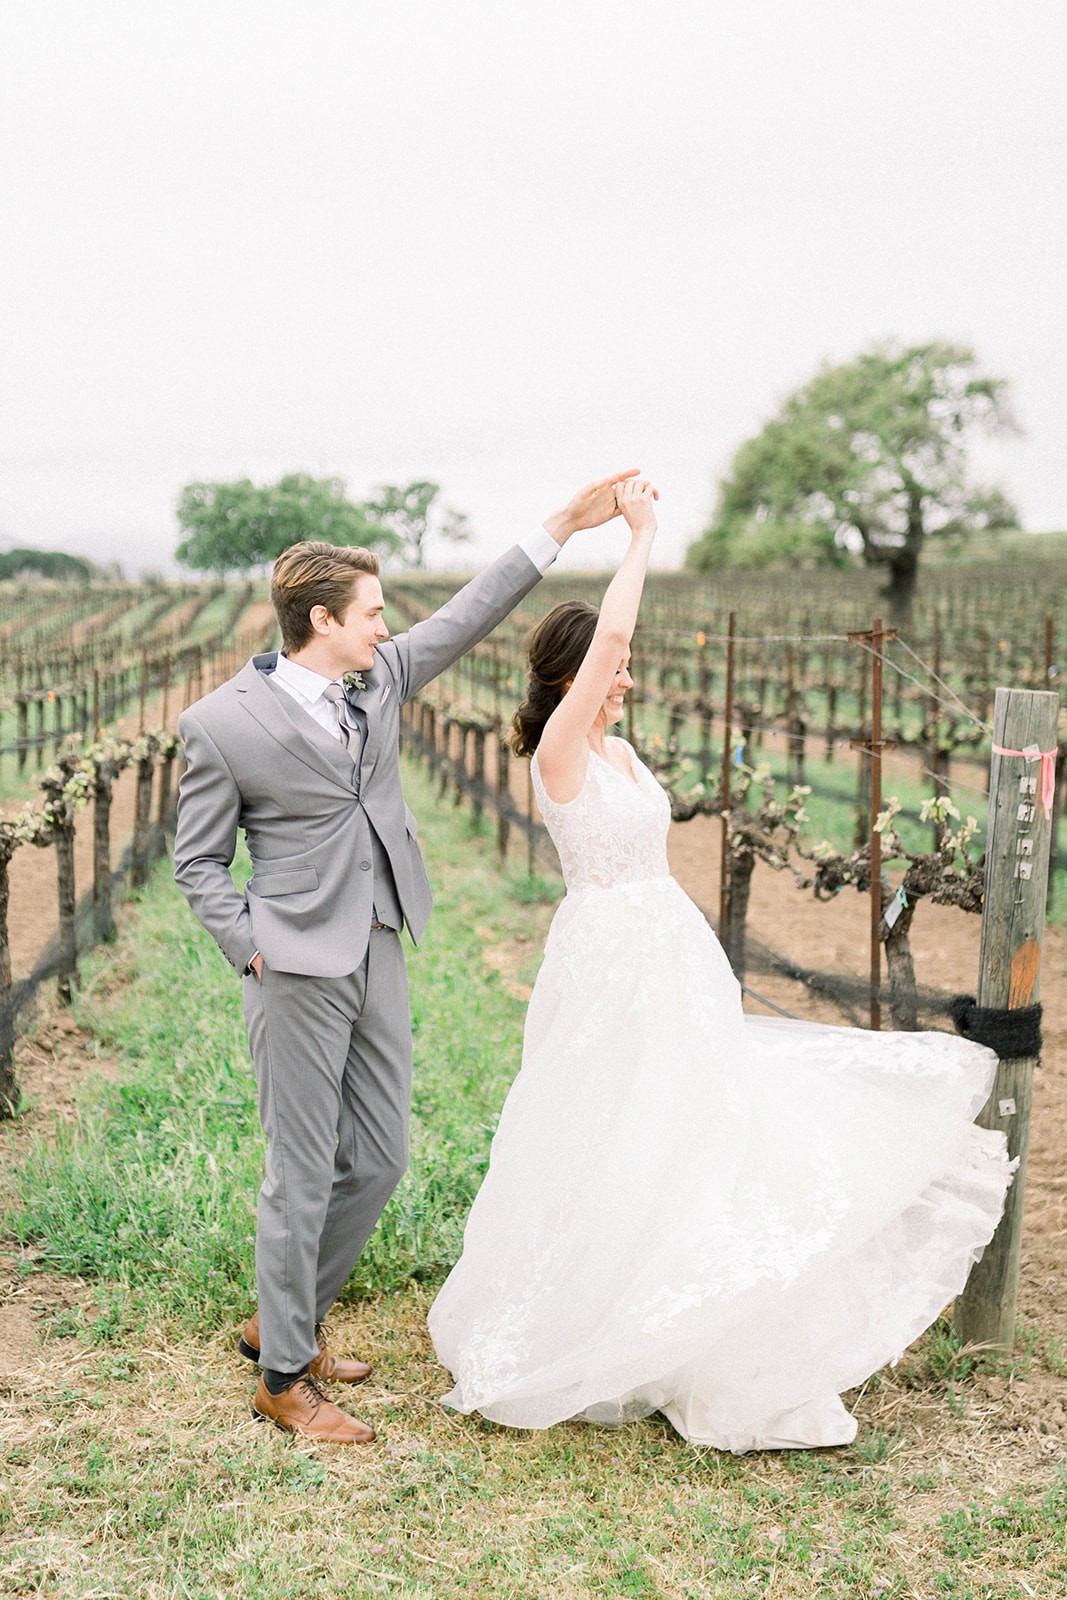 Candid luxury wedding moment at Sunstone Winery, with Southern California’s hills in the backdrop.